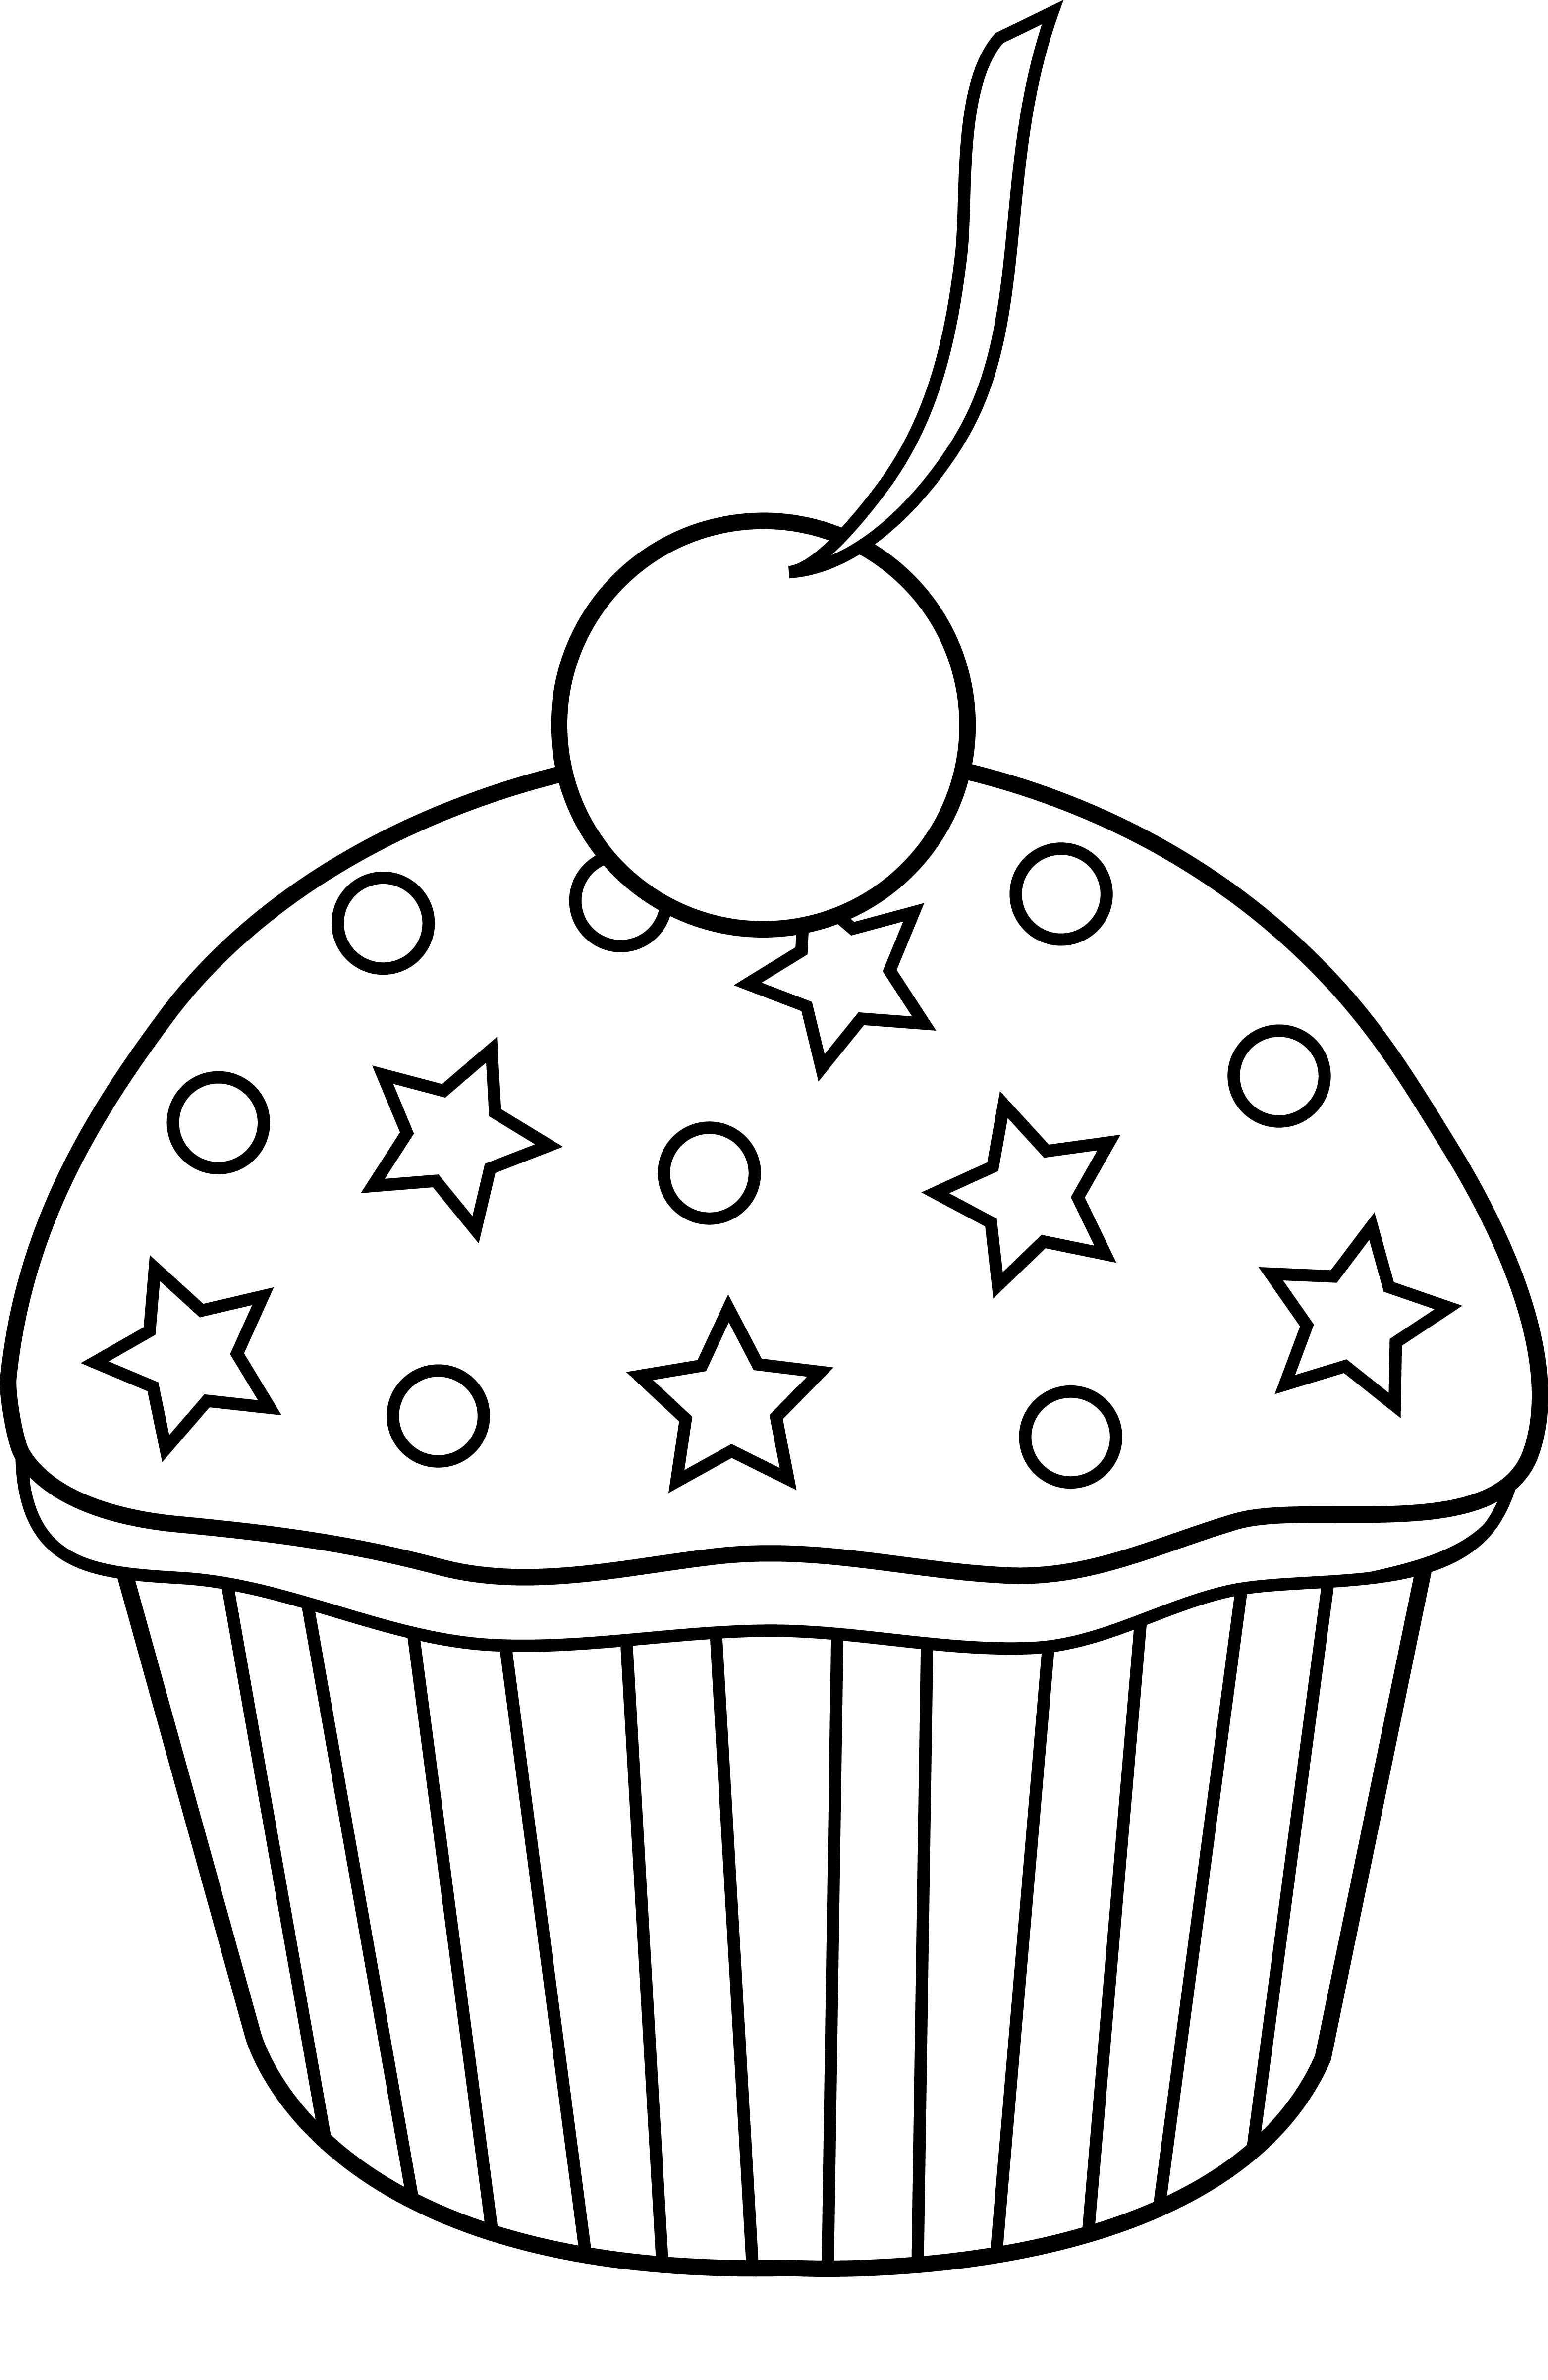 Free Cupcake Outline, Download Free Cupcake Outline png images, Free